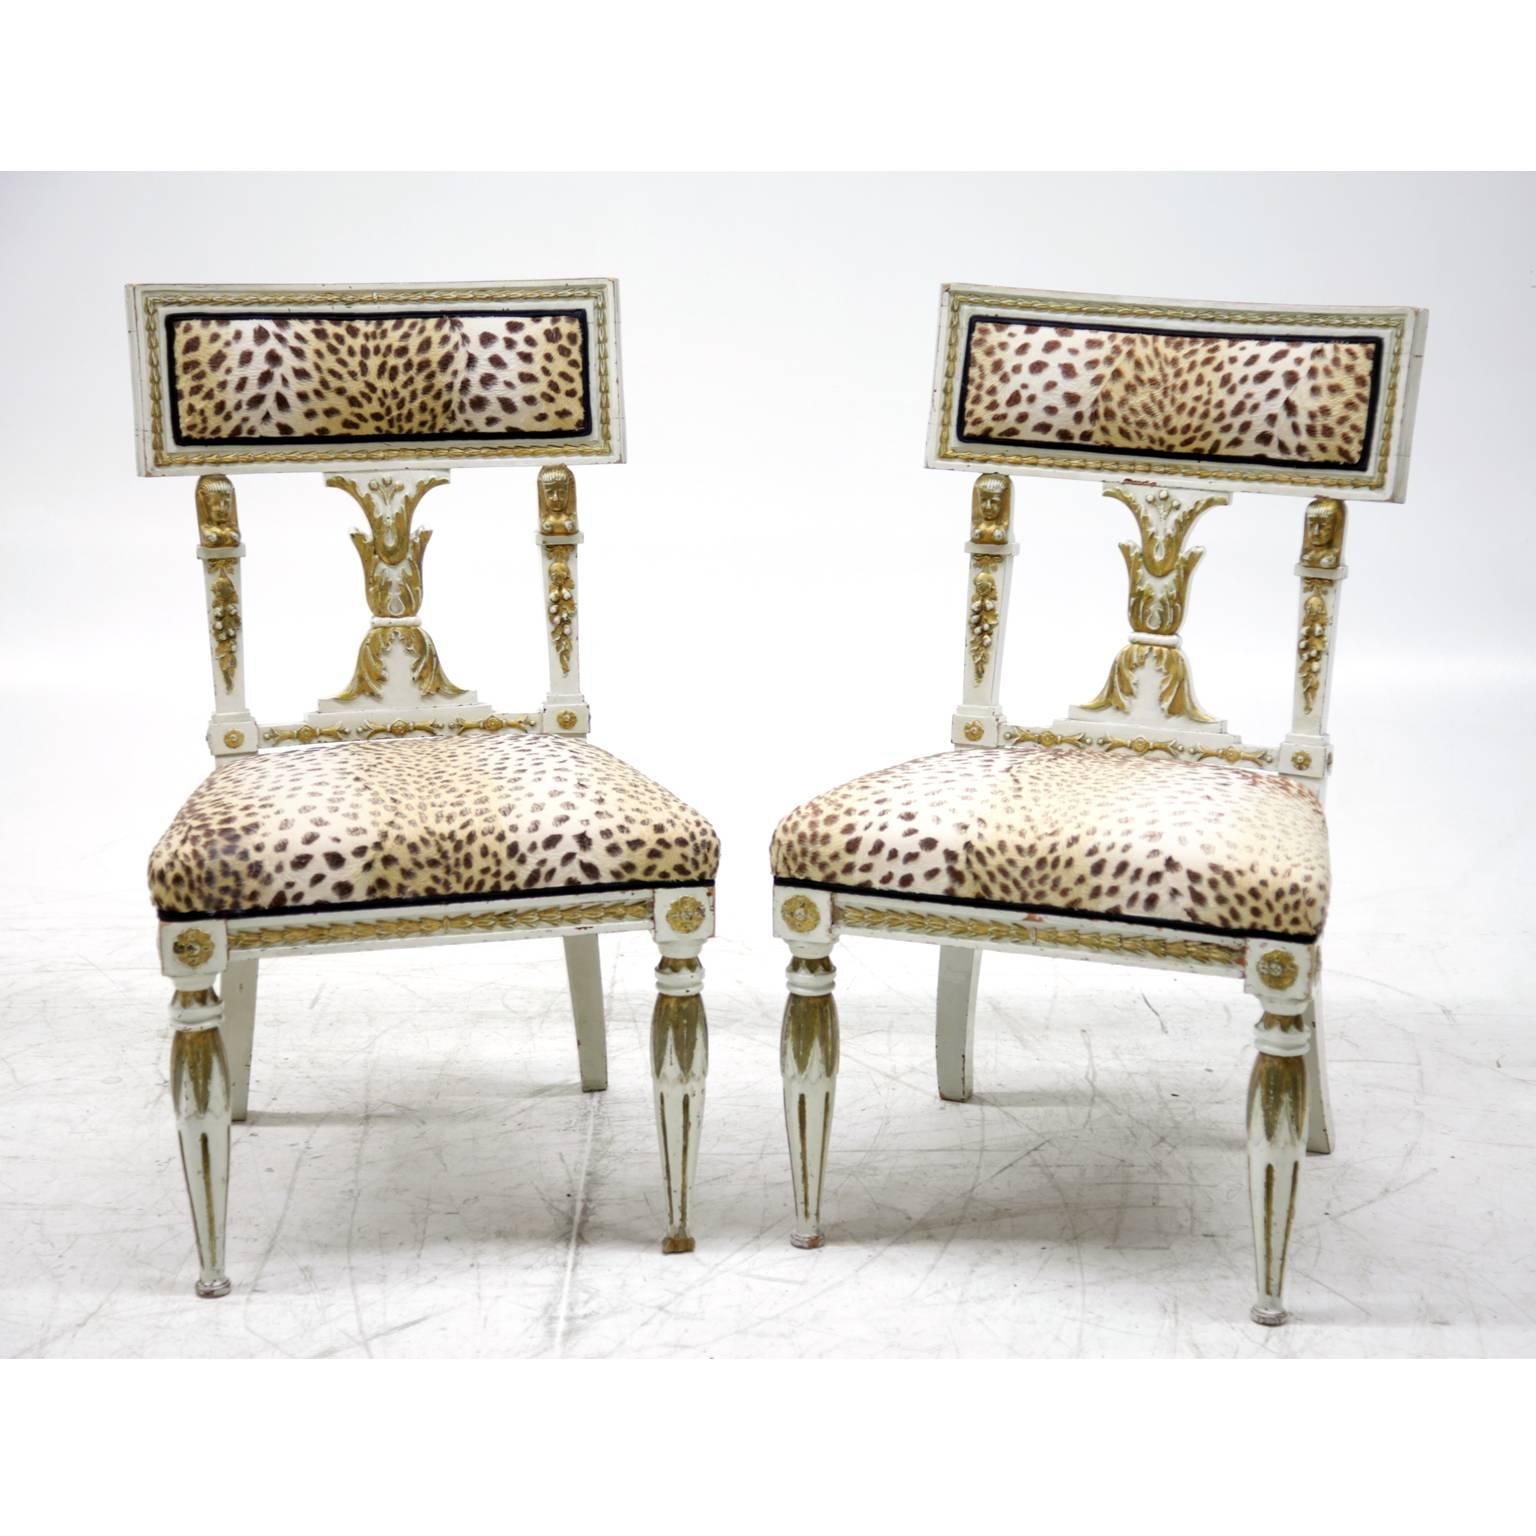 Pair of white dining chairs in Gustavian Style with gold details. In an unrestored condition.